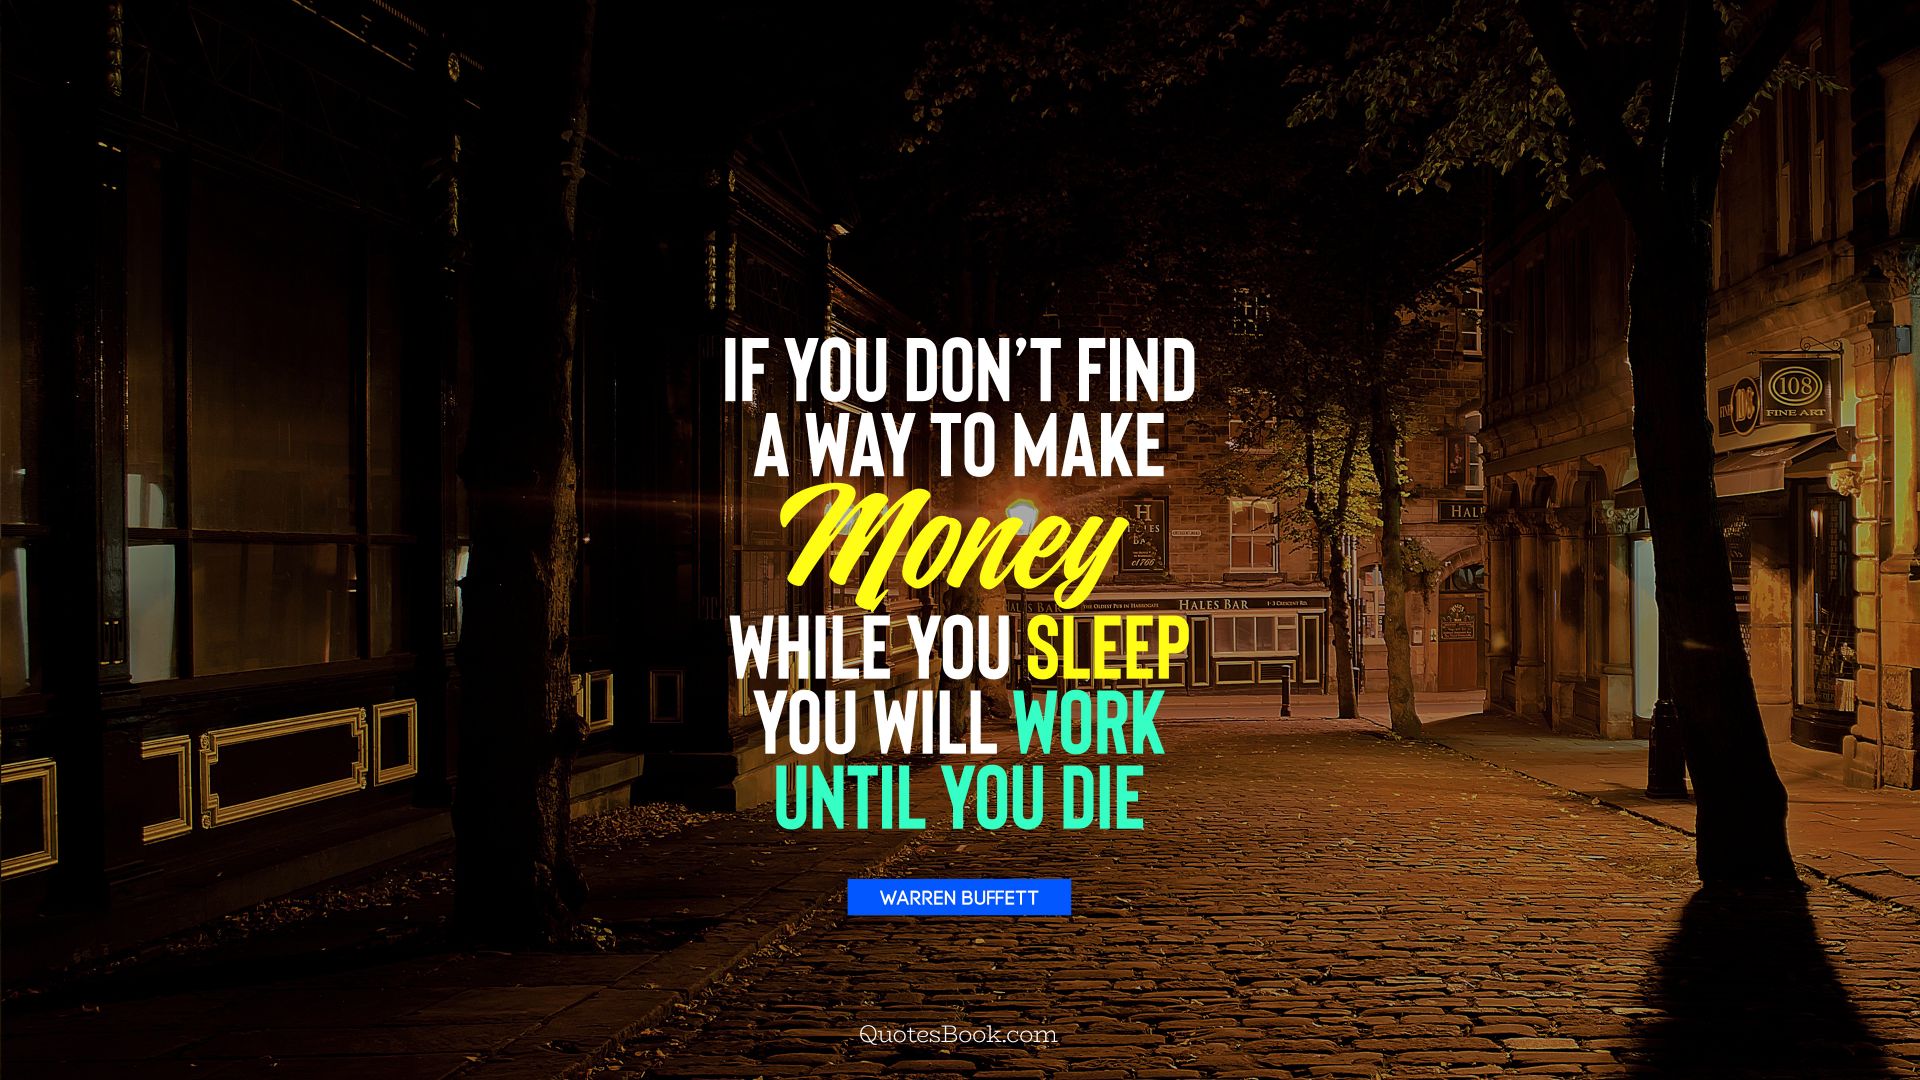 If you don't find a way to make money while you sleep you will work until you die . - Quote by Warren Buffett 